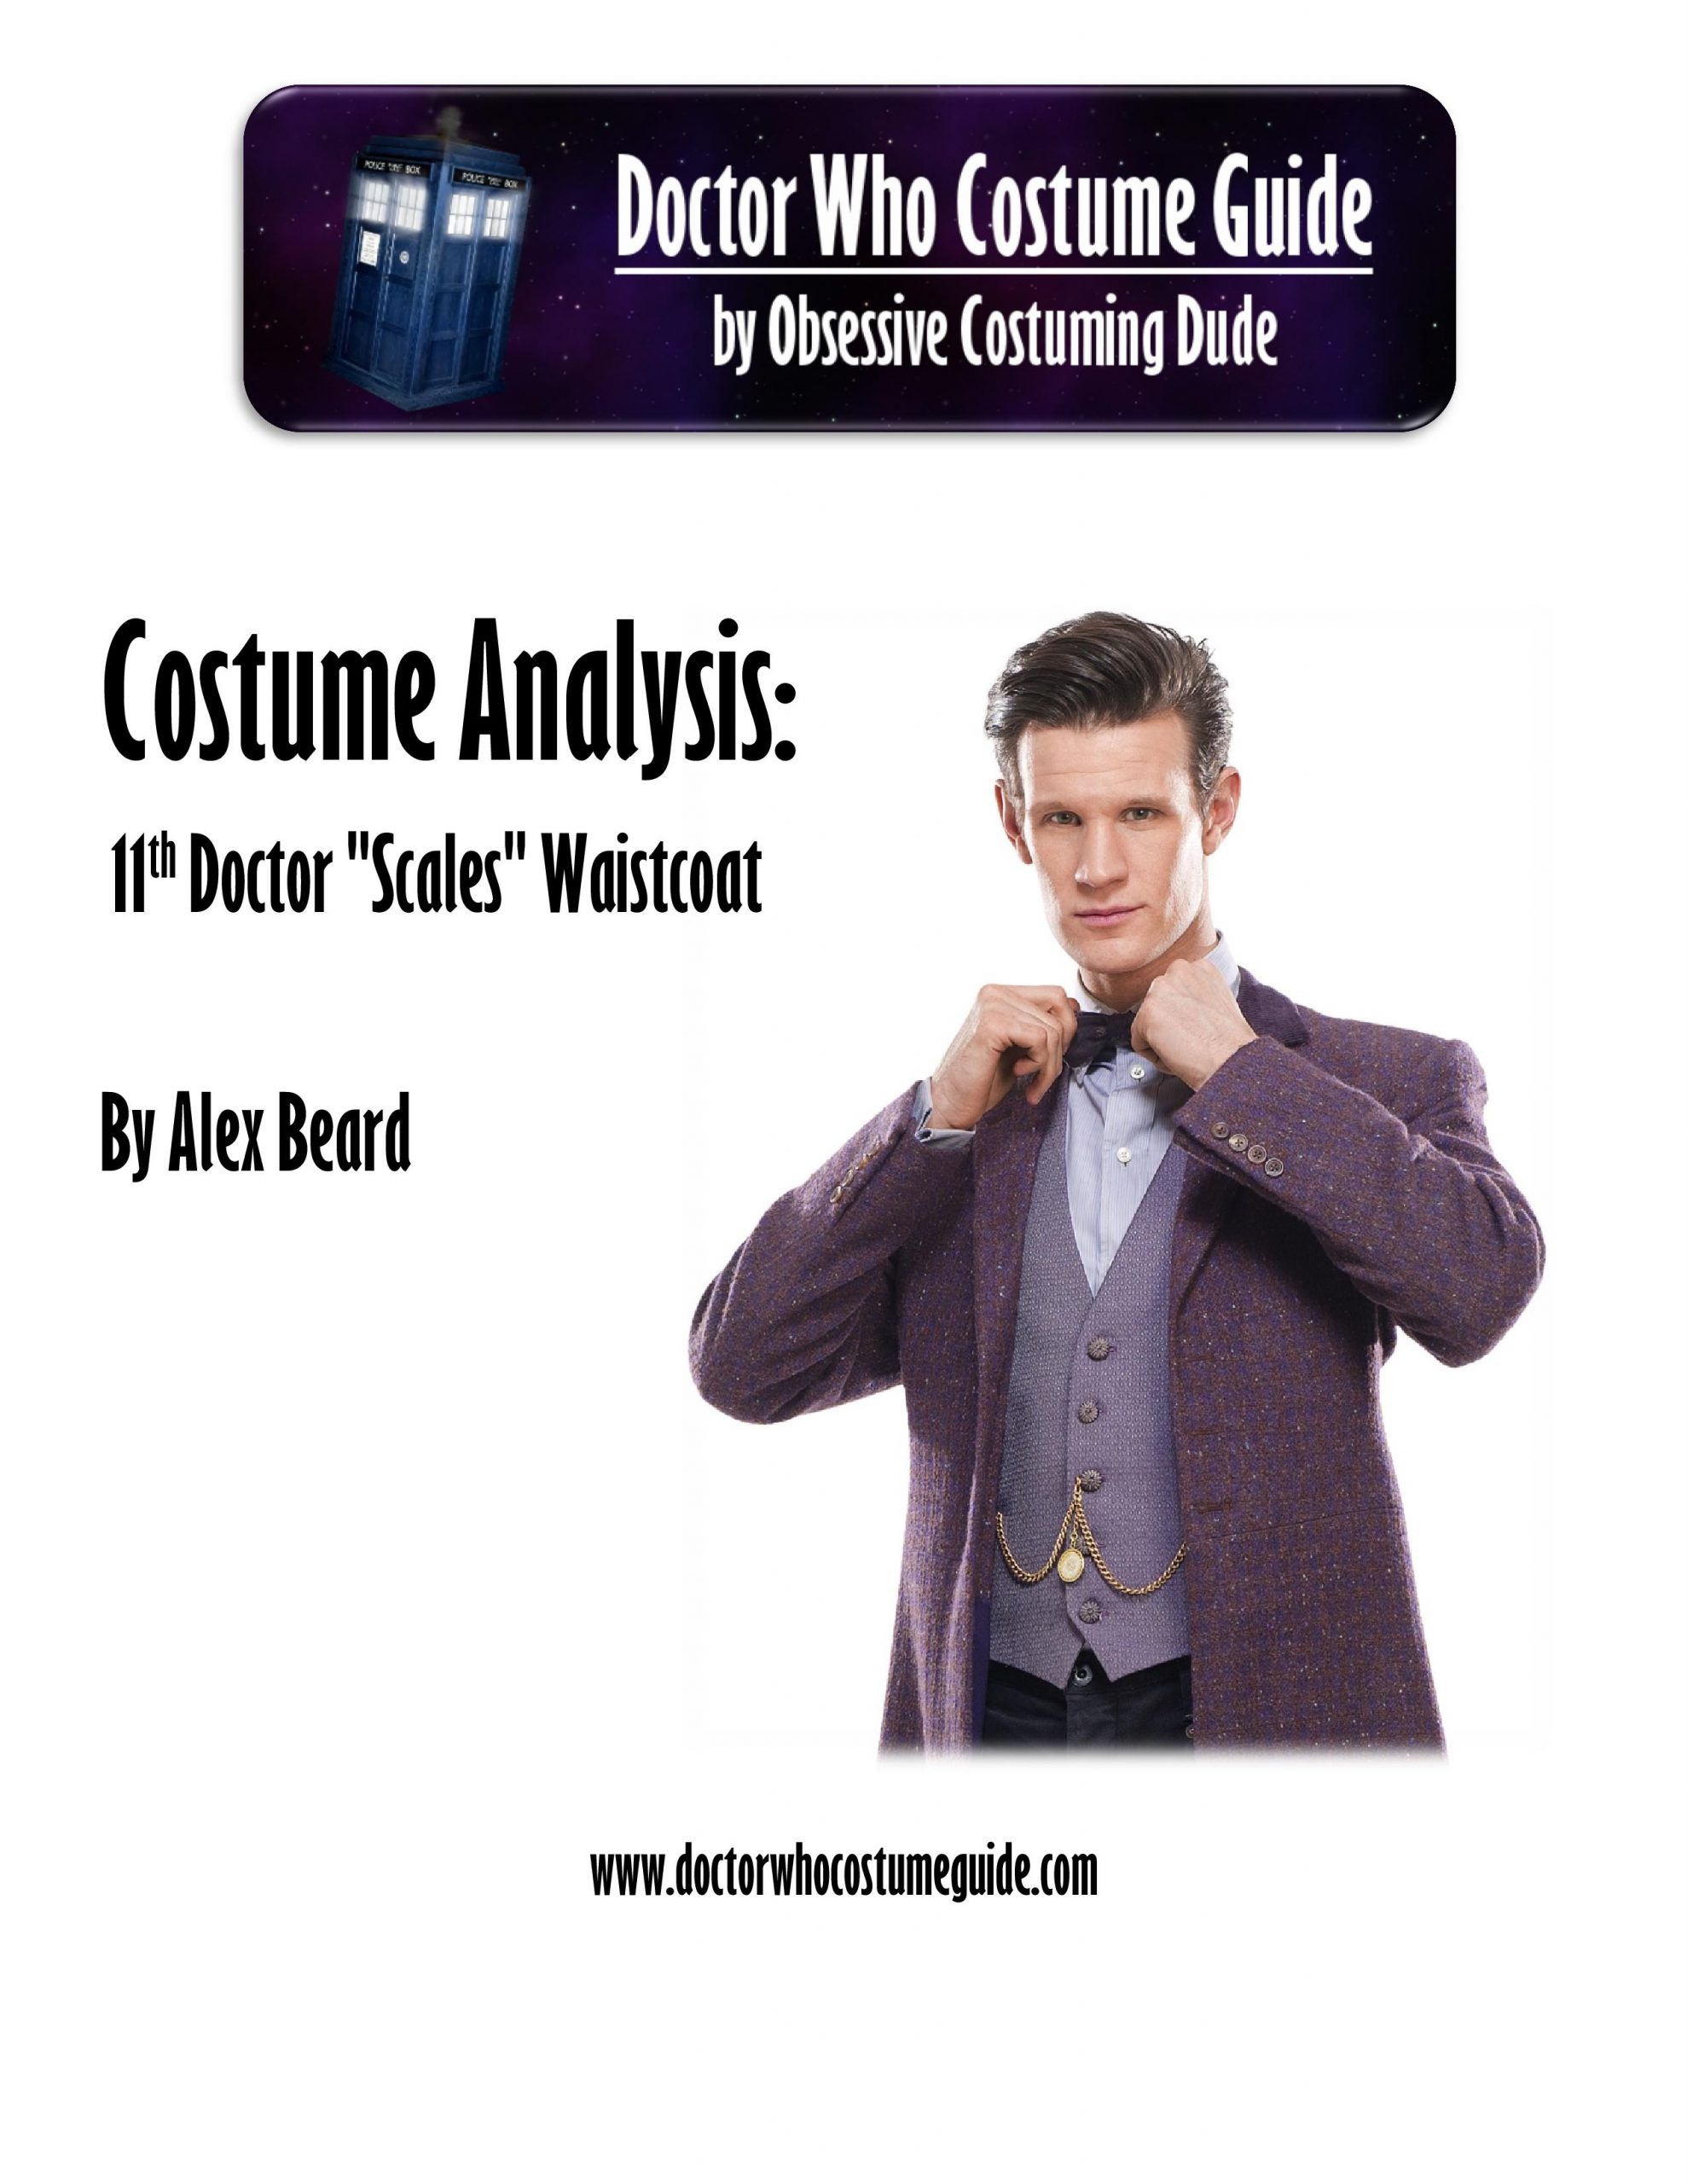 11th Doctor "scales" waistcoat - costume analysis (Obsessive Costuming Dude)